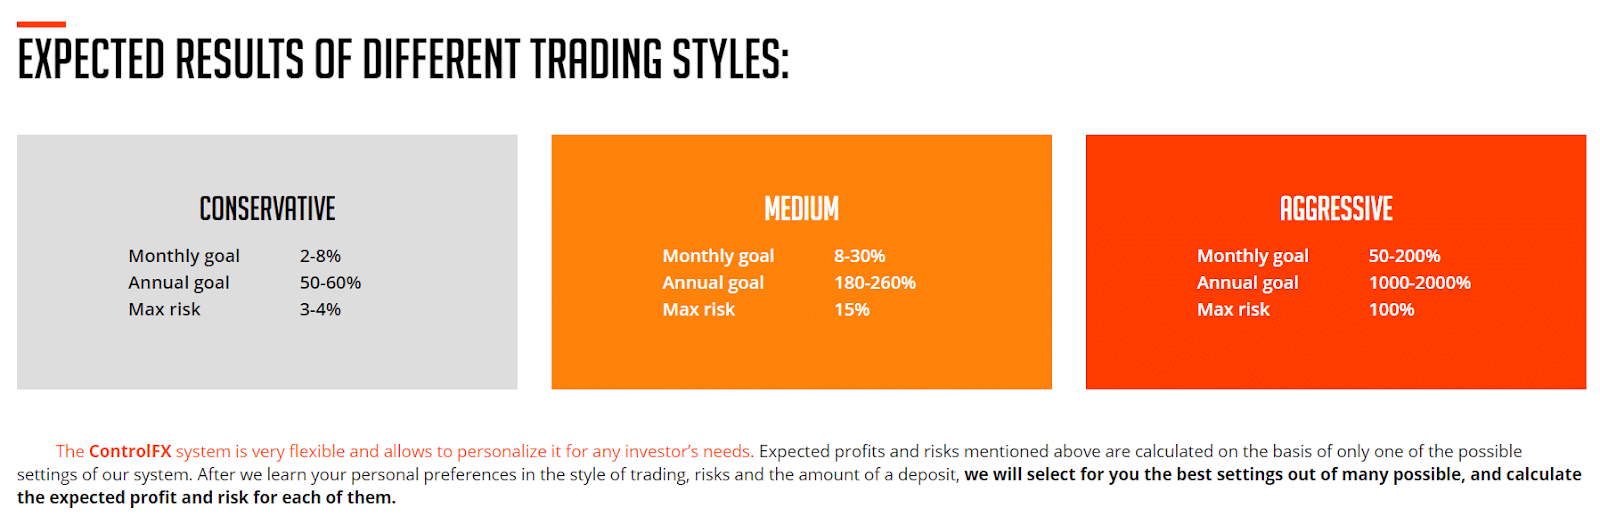 Trading styles